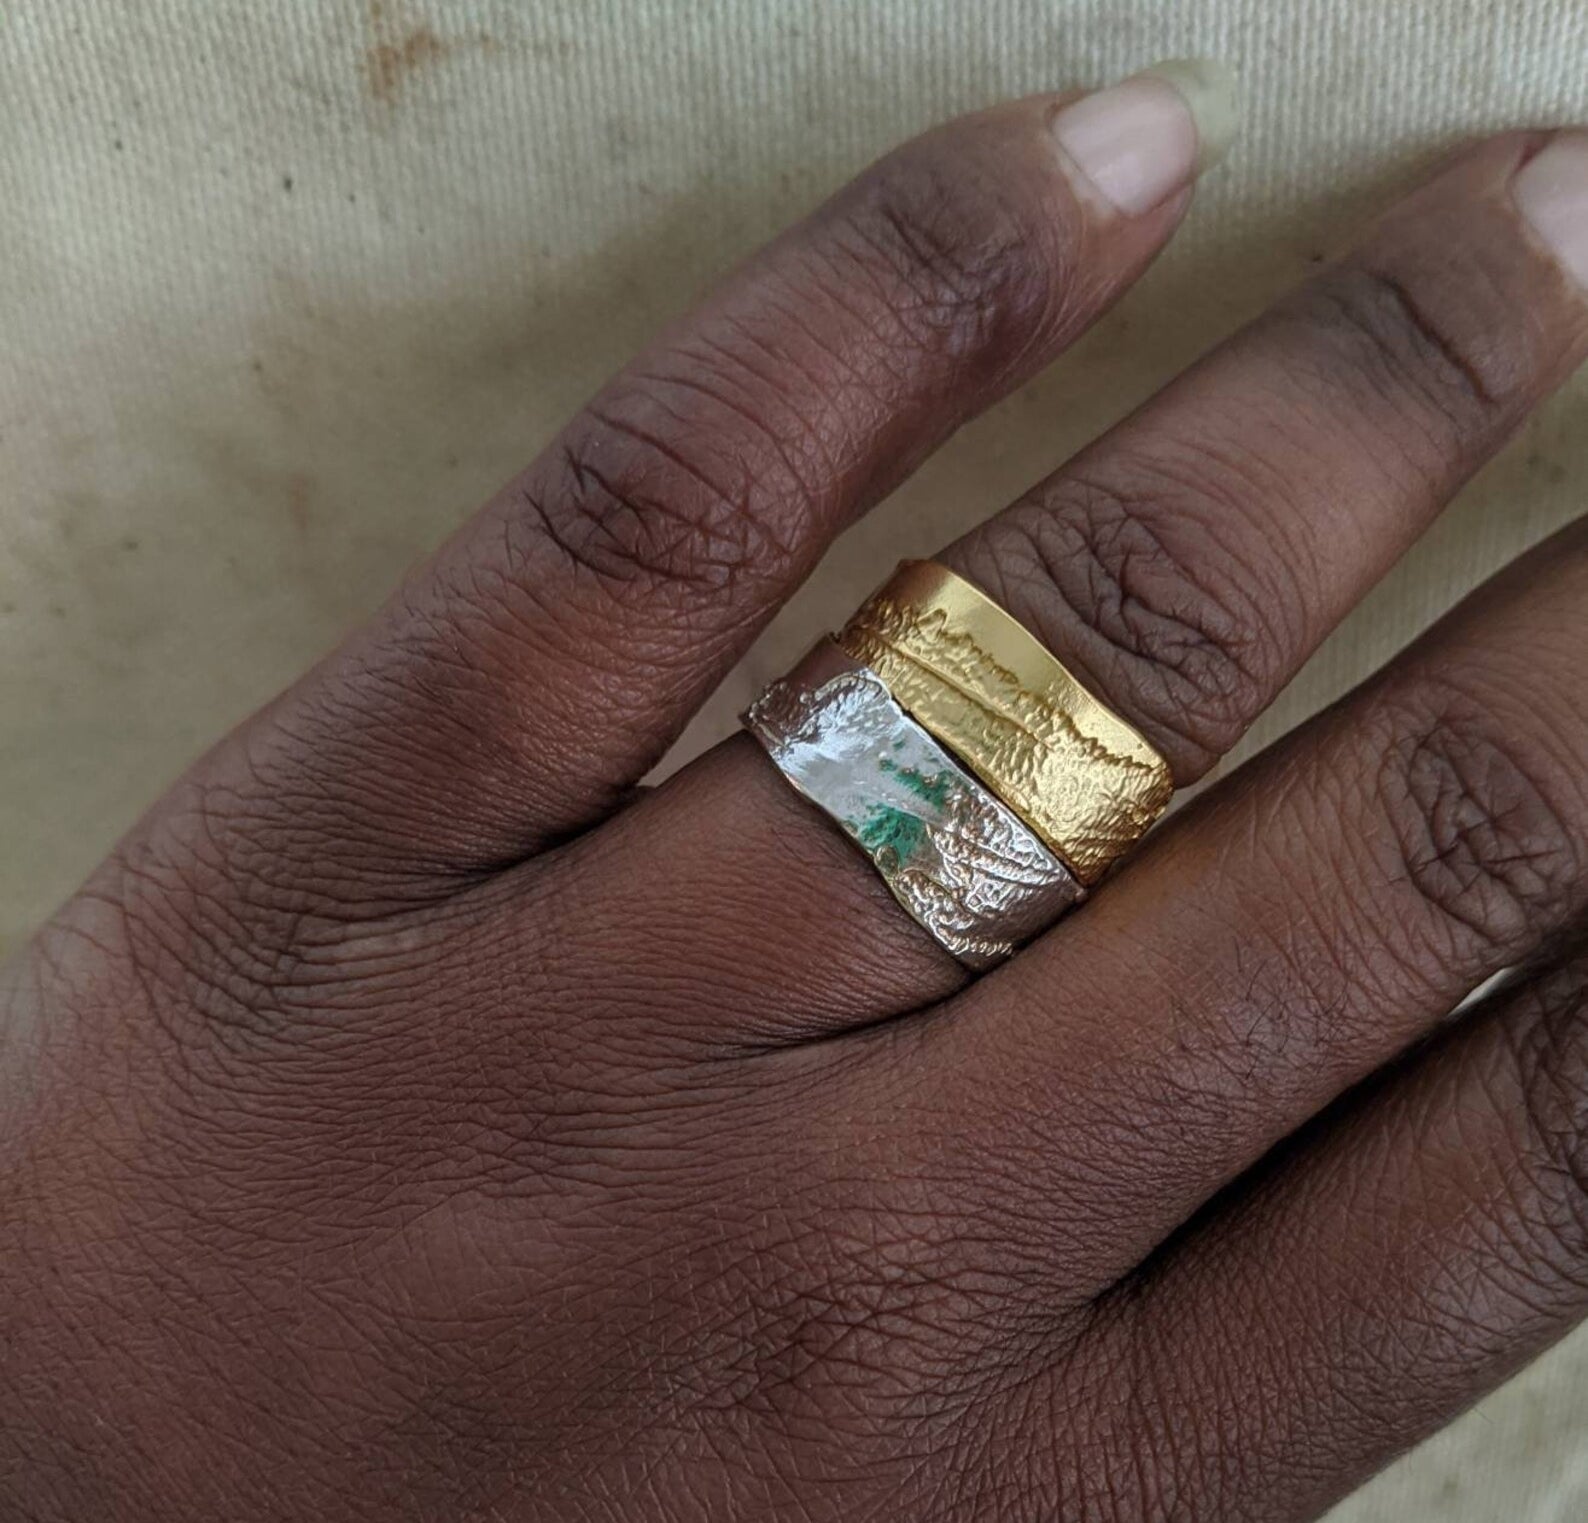 the ring in gold and silver stacked on one finger. both are flat and etched.